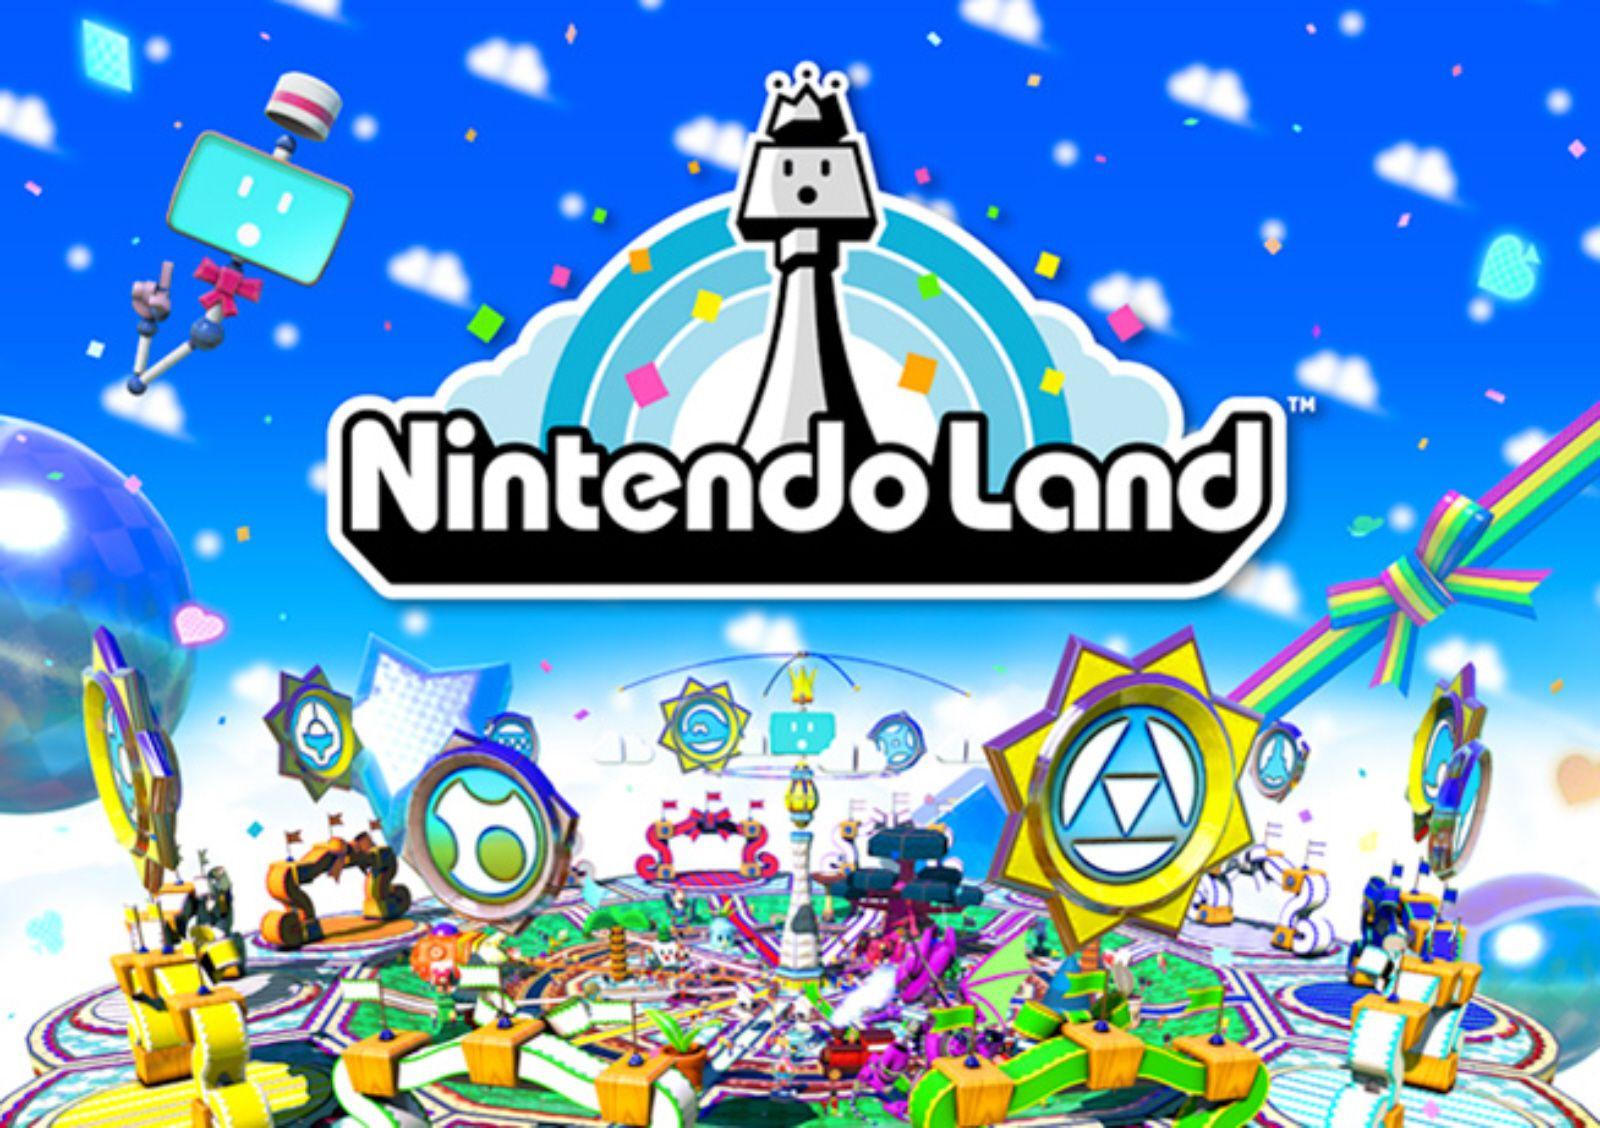 Nintendo Land Wii U Launch Game Announced At E3 2012. Mini Game Theme Park Combines Multiple Nintendo Universes In One Mii Adventure. Watch Us Play Games